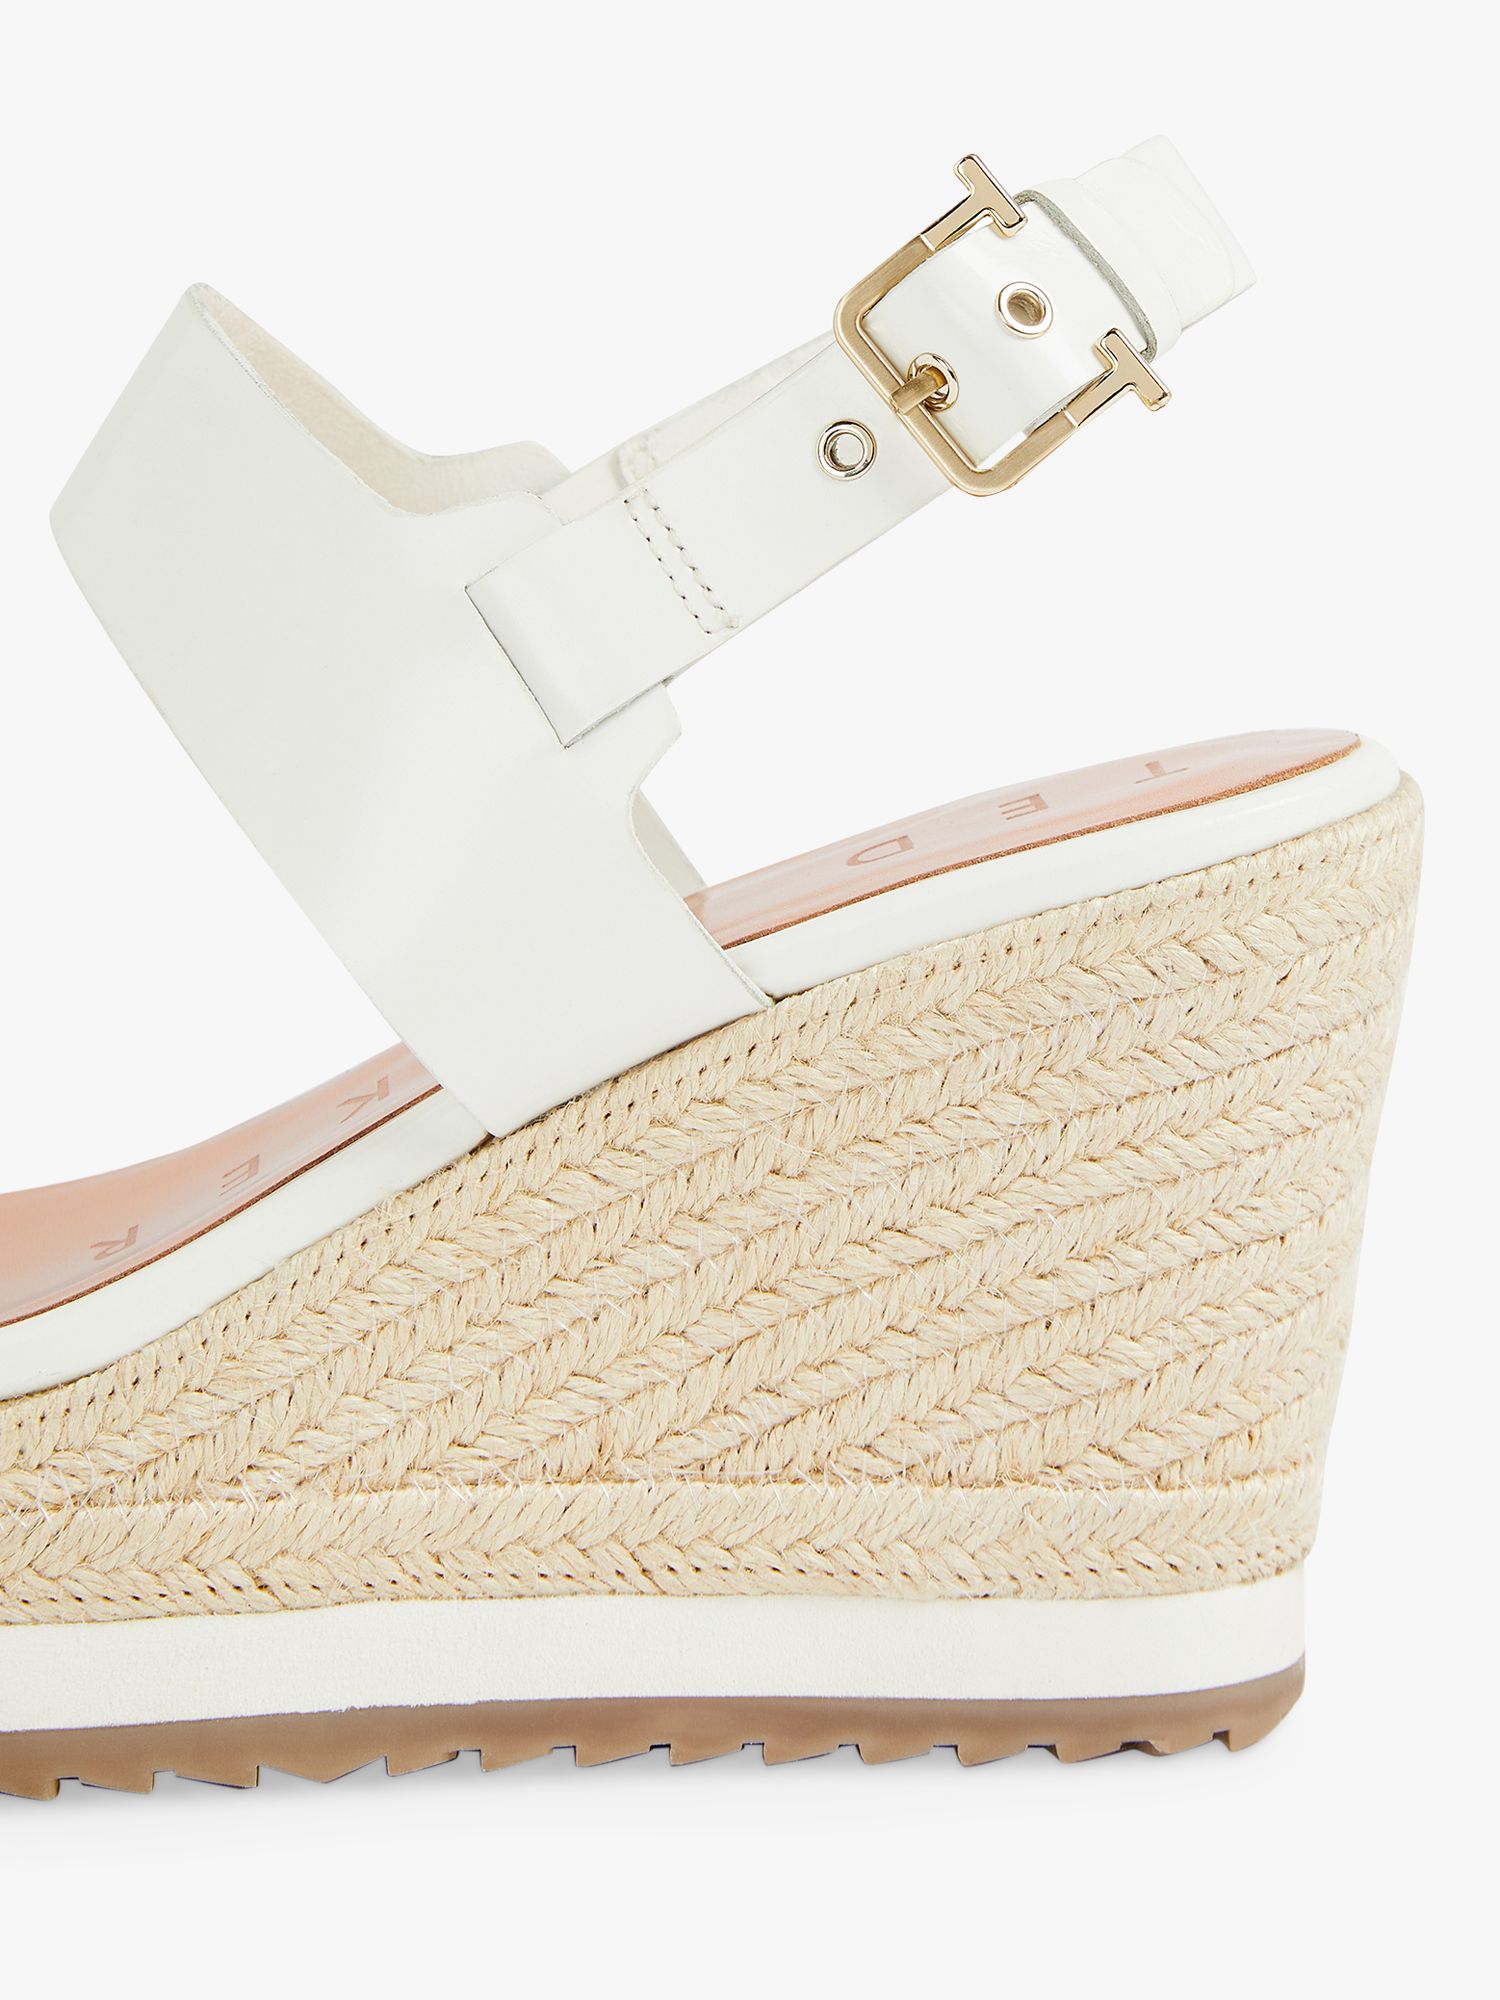 Ted Baker Archei Leather Wedge Heel Sandals, White at John Lewis & Partners